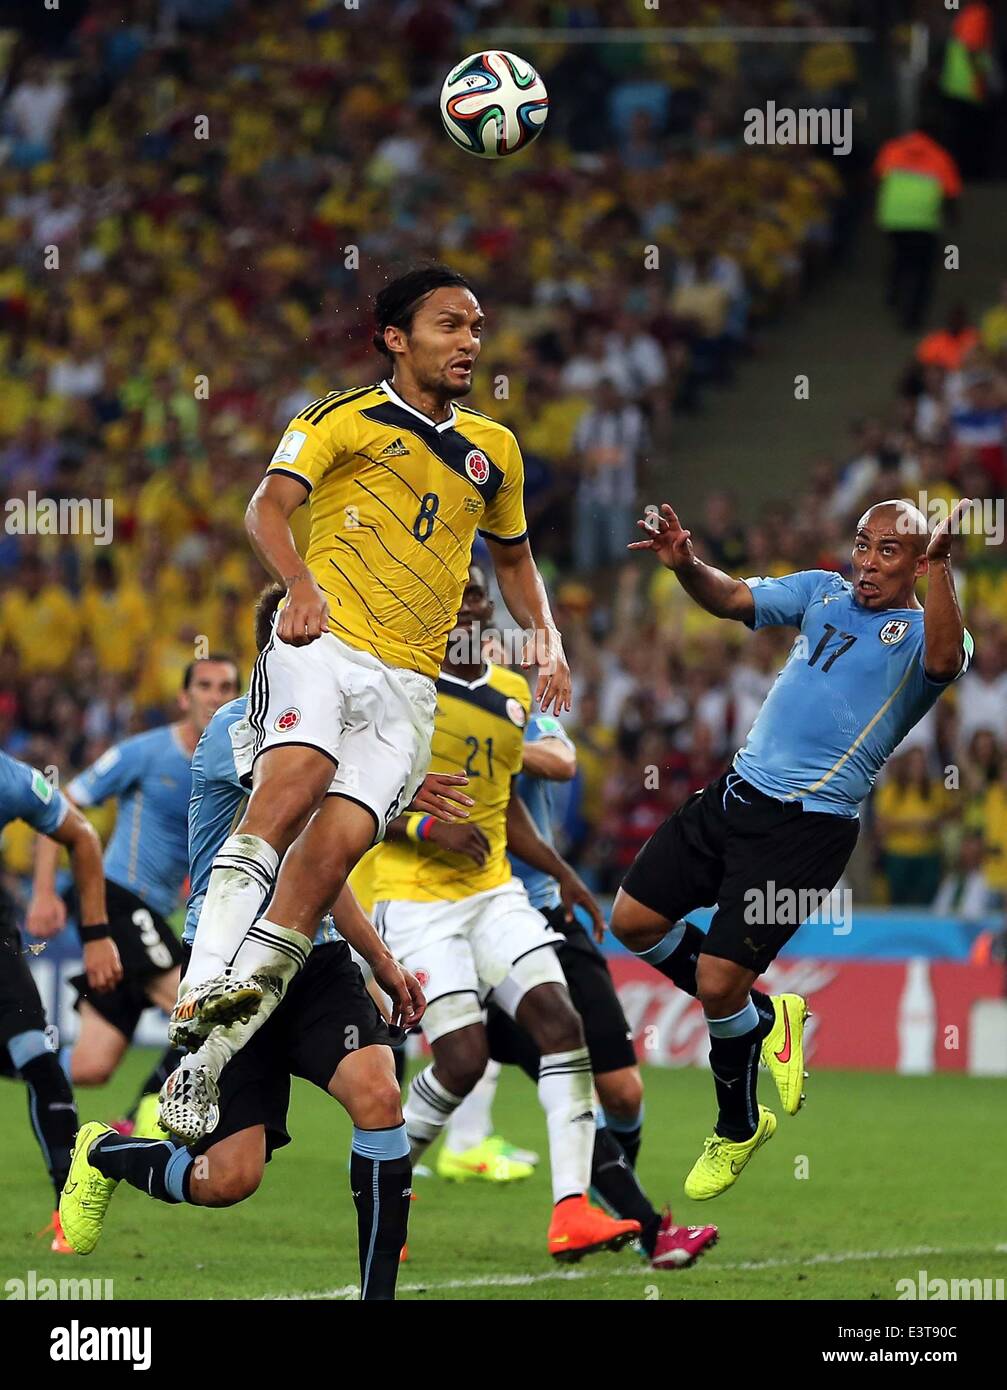 Rio De Janeiro, Brazil. 28th June, 2014. Colombia's Abel Aguilar (up) jumps for a header during a Round of 16 match between Colombia and Uruguay of 2014 FIFA World Cup at the Estadio do Maracana Stadium in Rio de Janeiro, Brazil, on June 28, 2014. Colombia won 2-0 over Uruguay on Saturday. Credit:  Xu Zijian/Xinhua/Alamy Live News Stock Photo